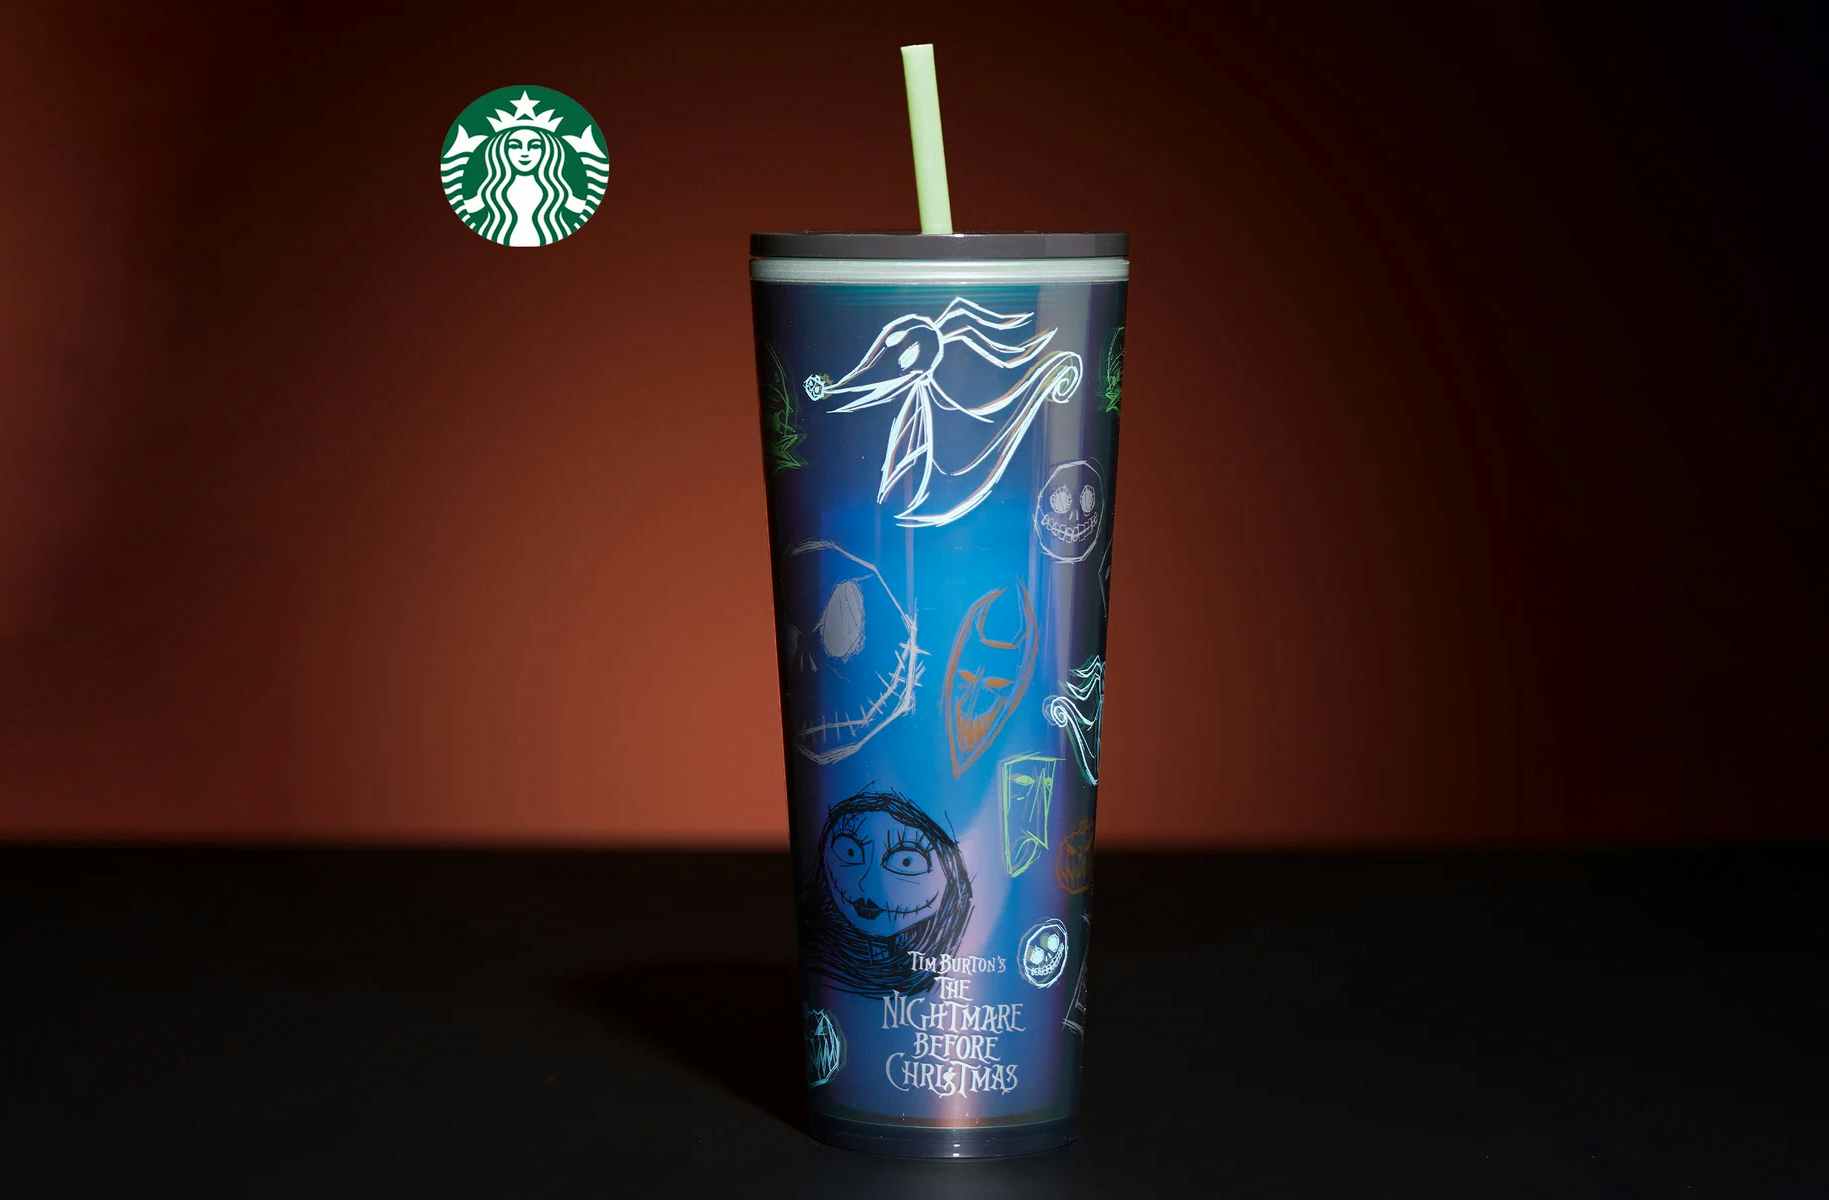 Blue cup with tim burtons nightmare before christmas characters on it against a grown background and next to the starbucks logo